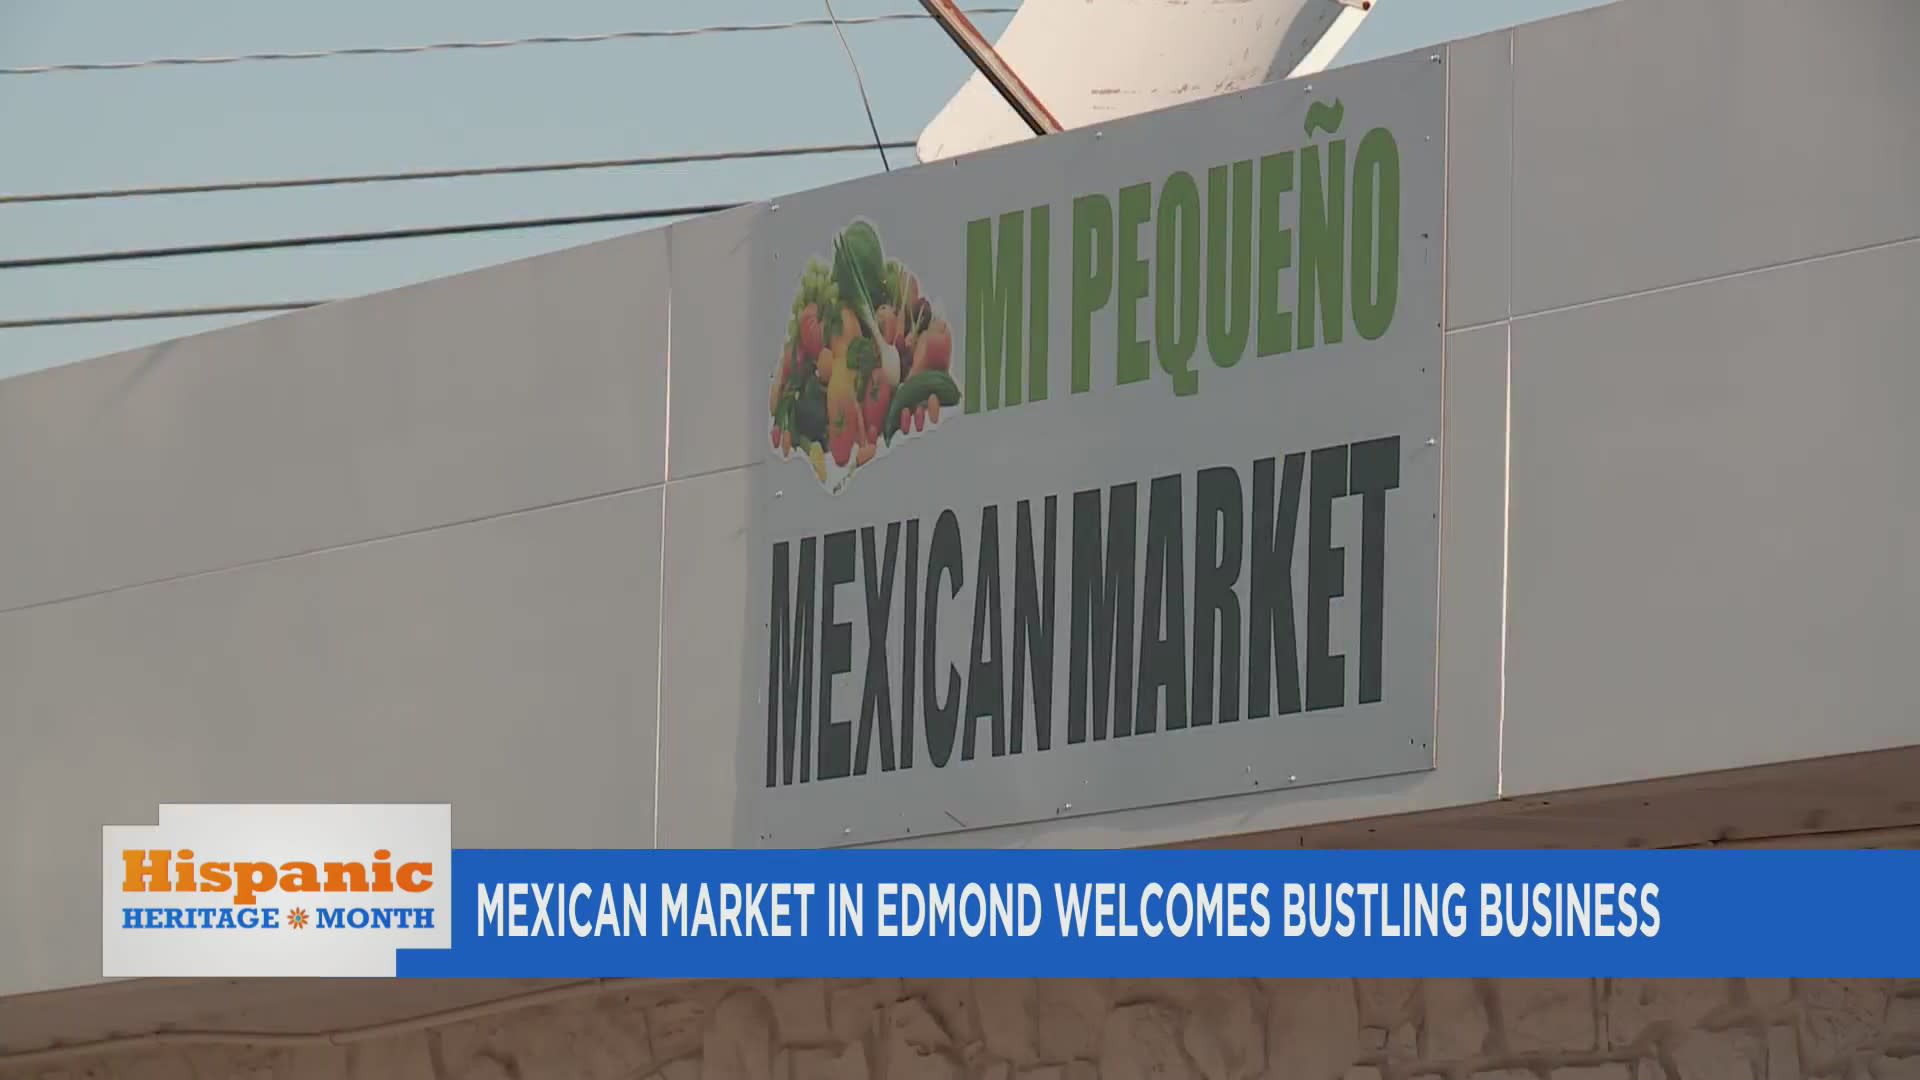 New Location Brings New Customers for Mexican Market photo